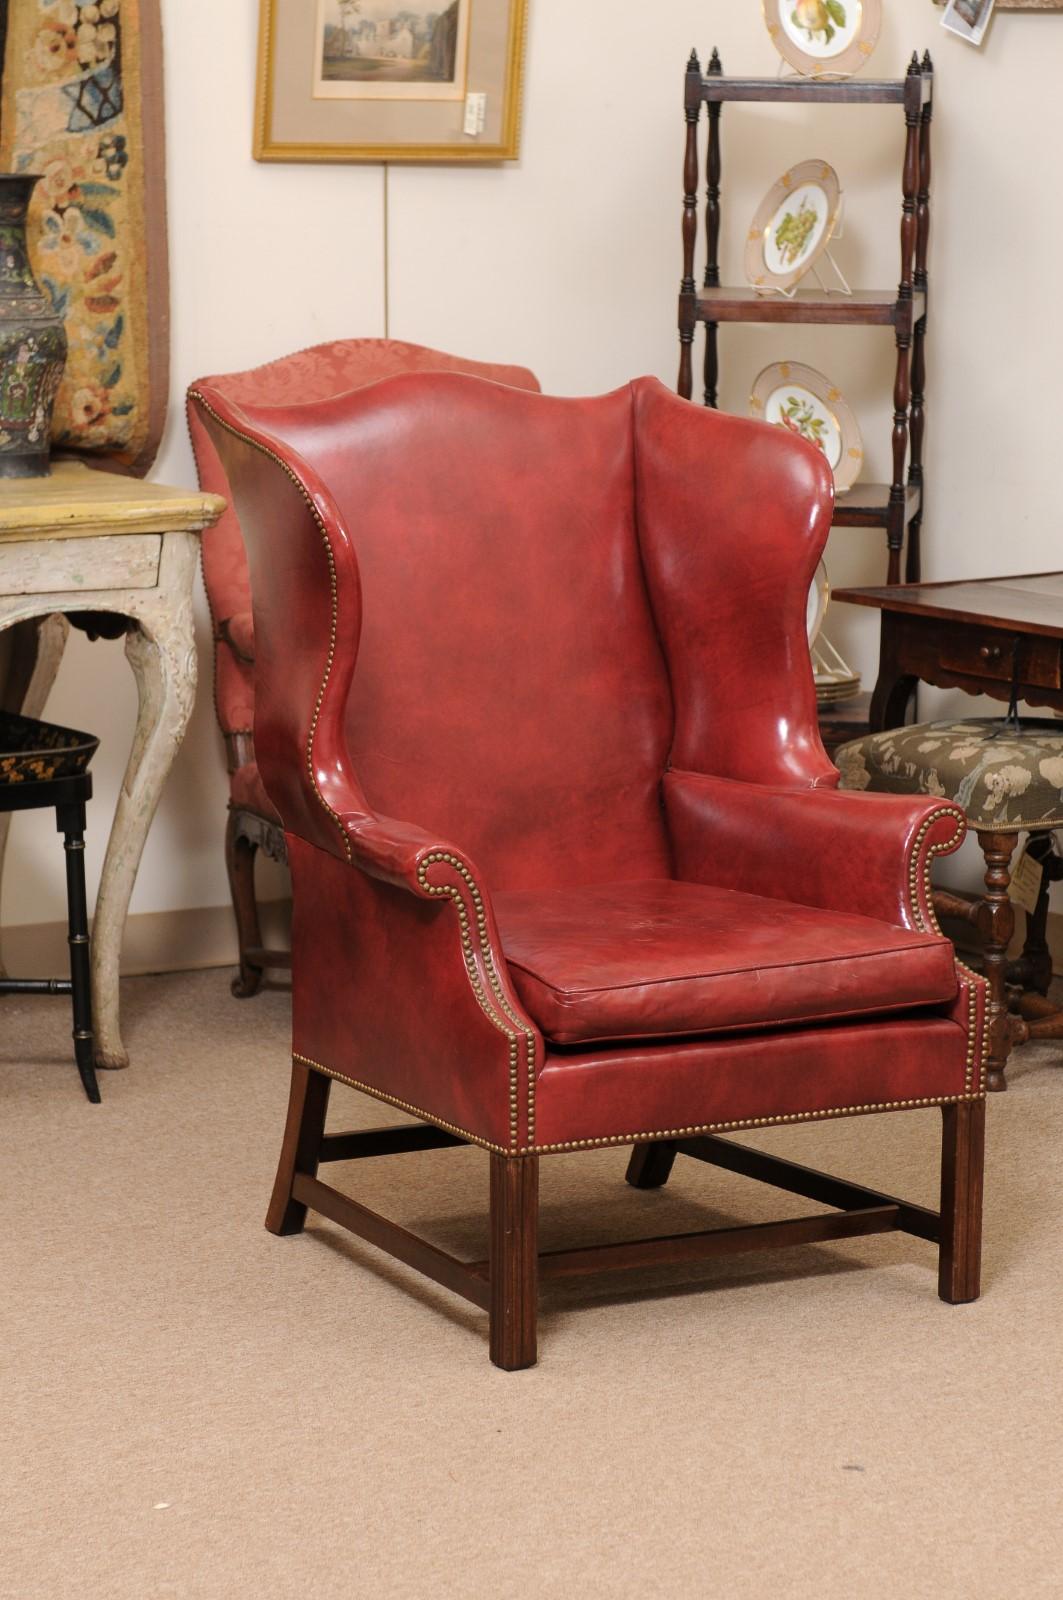 20th Century English Wing Chair in Mahogany & Red Leather Upholstery with Brass  For Sale 3